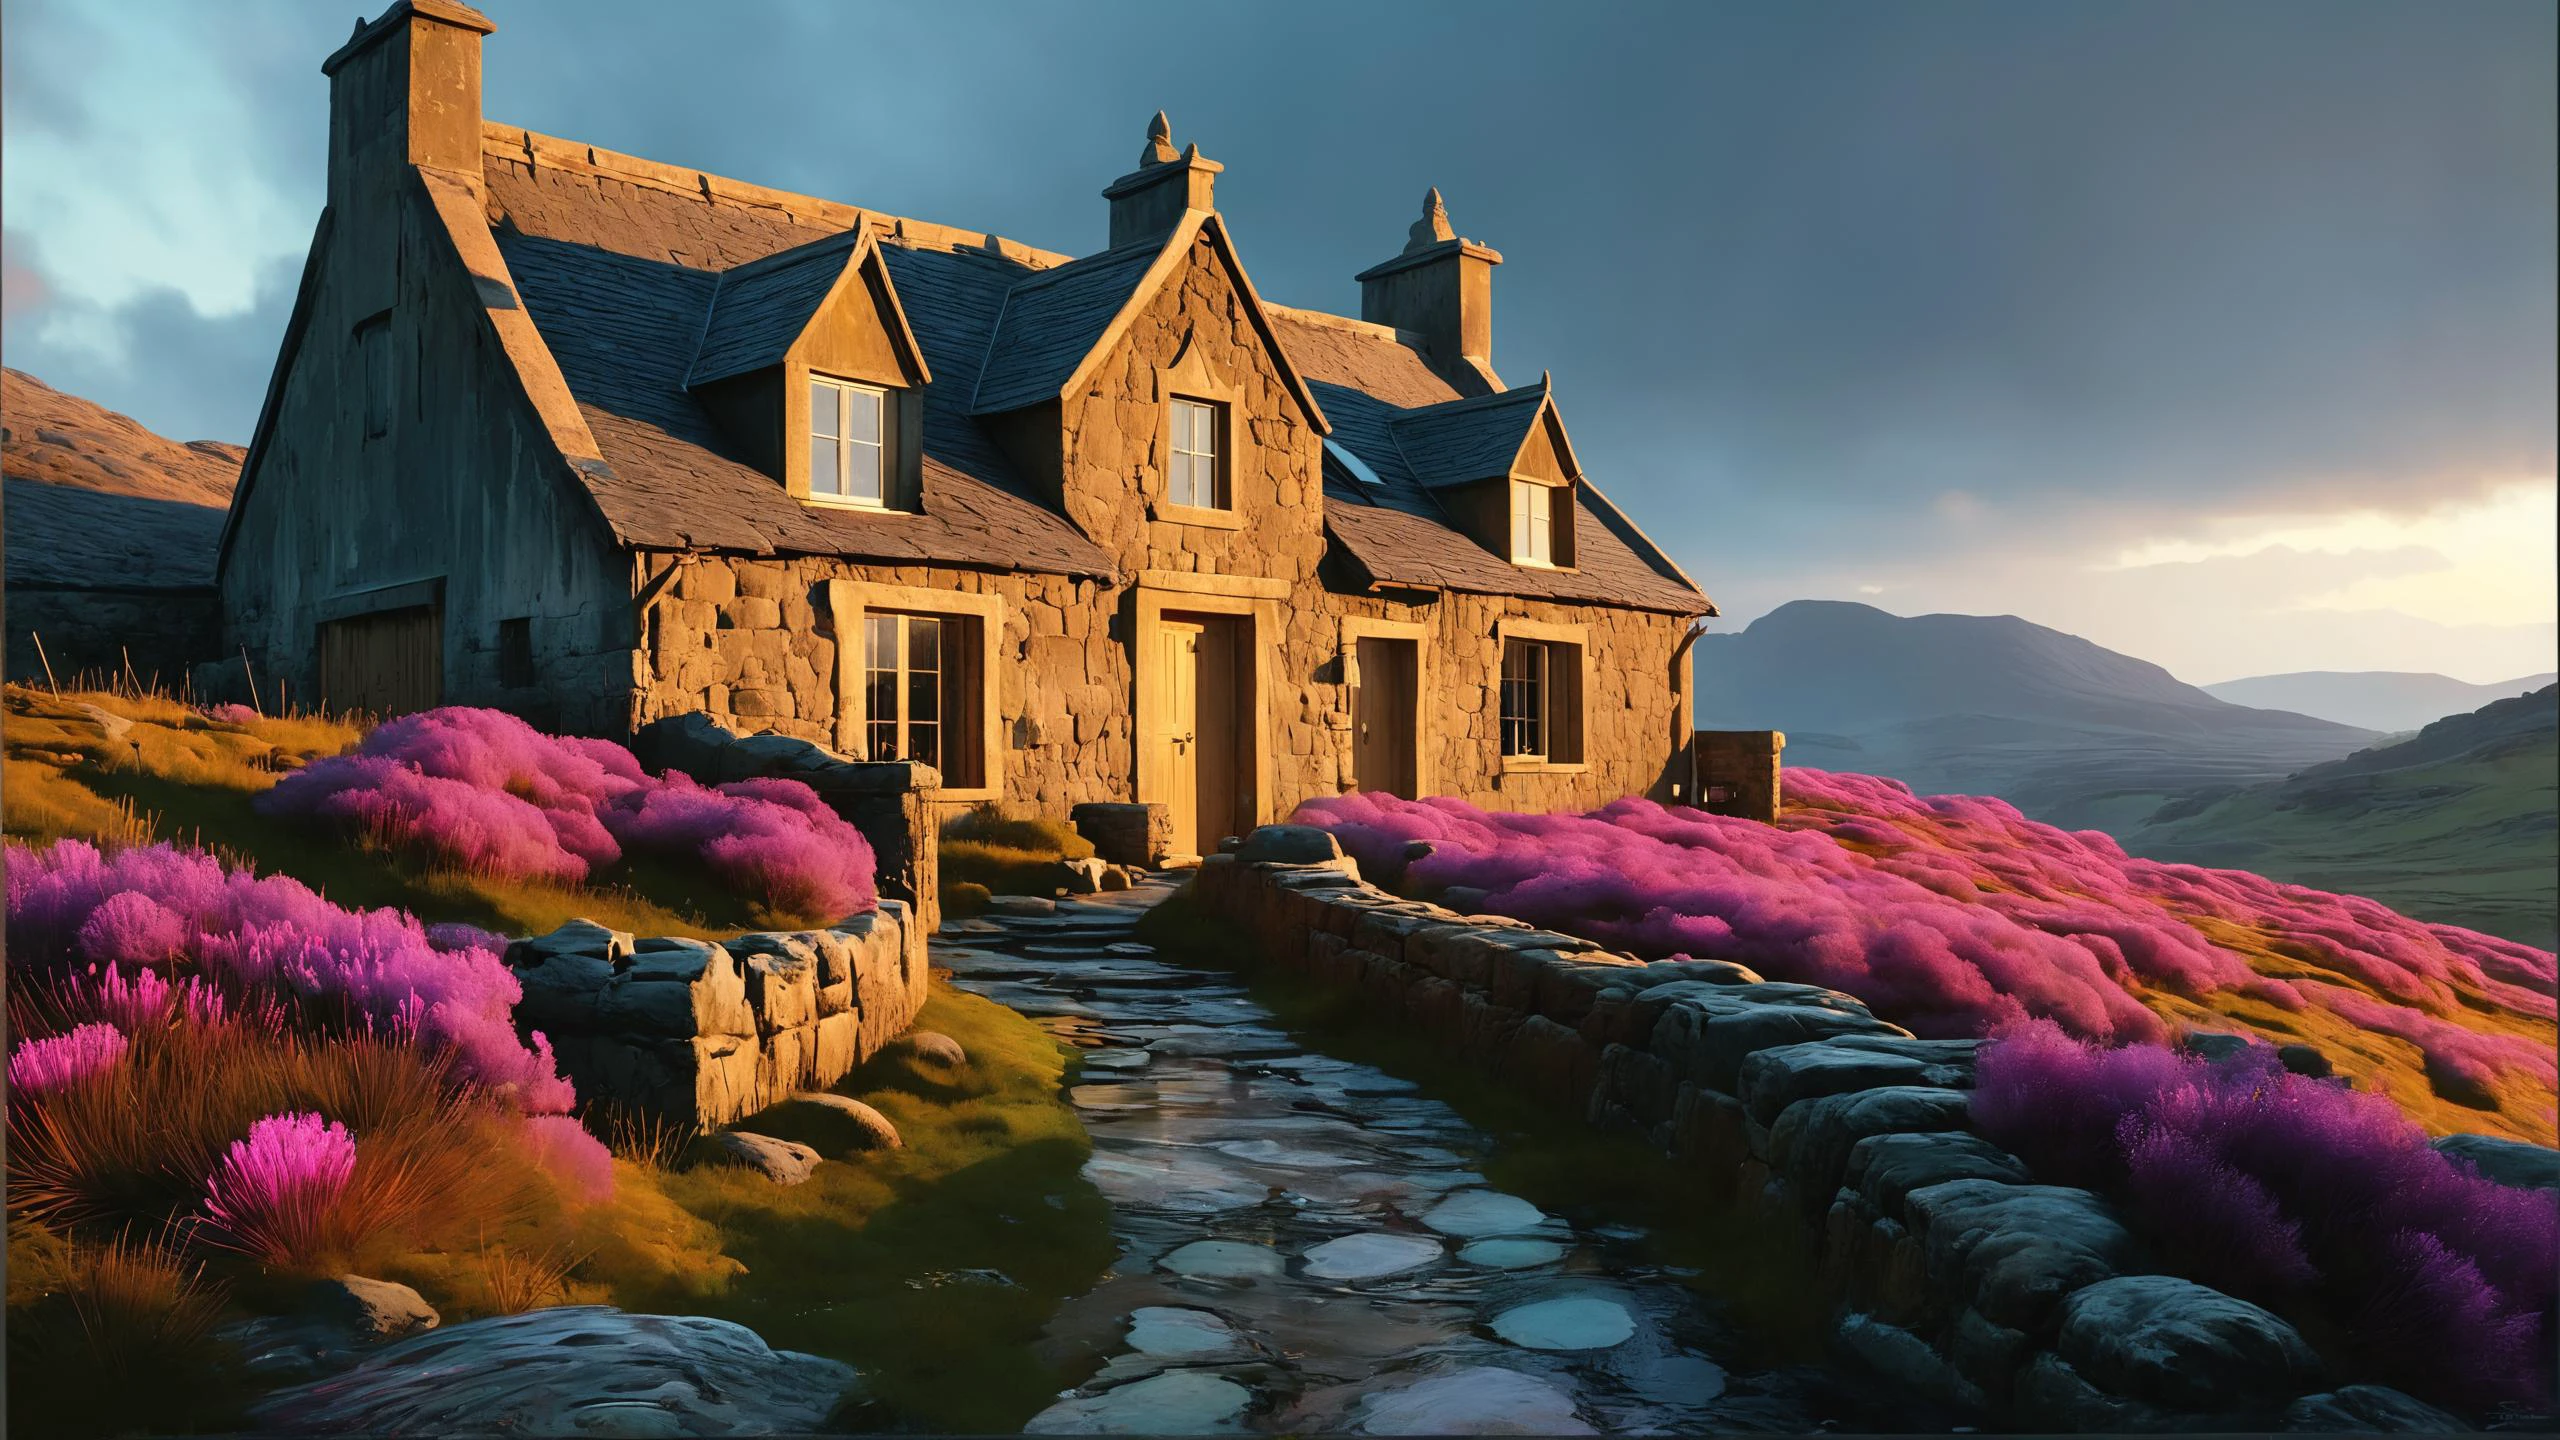 [A Scottish croft on the eDge of a winDswept moor, its stone walls weathereD by centuries of storms, surrounDeD by heather in shaDes of purple:A Deep-sea trench illuminateD by the bioluminescence of strange, außerirdische Kreaturen, their ethereal glows revealing the hiDDen Depths of the abyss:0.5],, Hintergrundbeleuchtung, Wunderschöner Spritzer lebendiger Farbe, iD magazine, a mysterious ghost town within the mountains ghibli animateD film, D&D by Michael Whelan, Bob Larkin anD Tomer Hanuka, simple white backgrounD, (((((keine Leute))))))), 8k, trenDing on artstation, Innenansicht des Badehausrahmens  